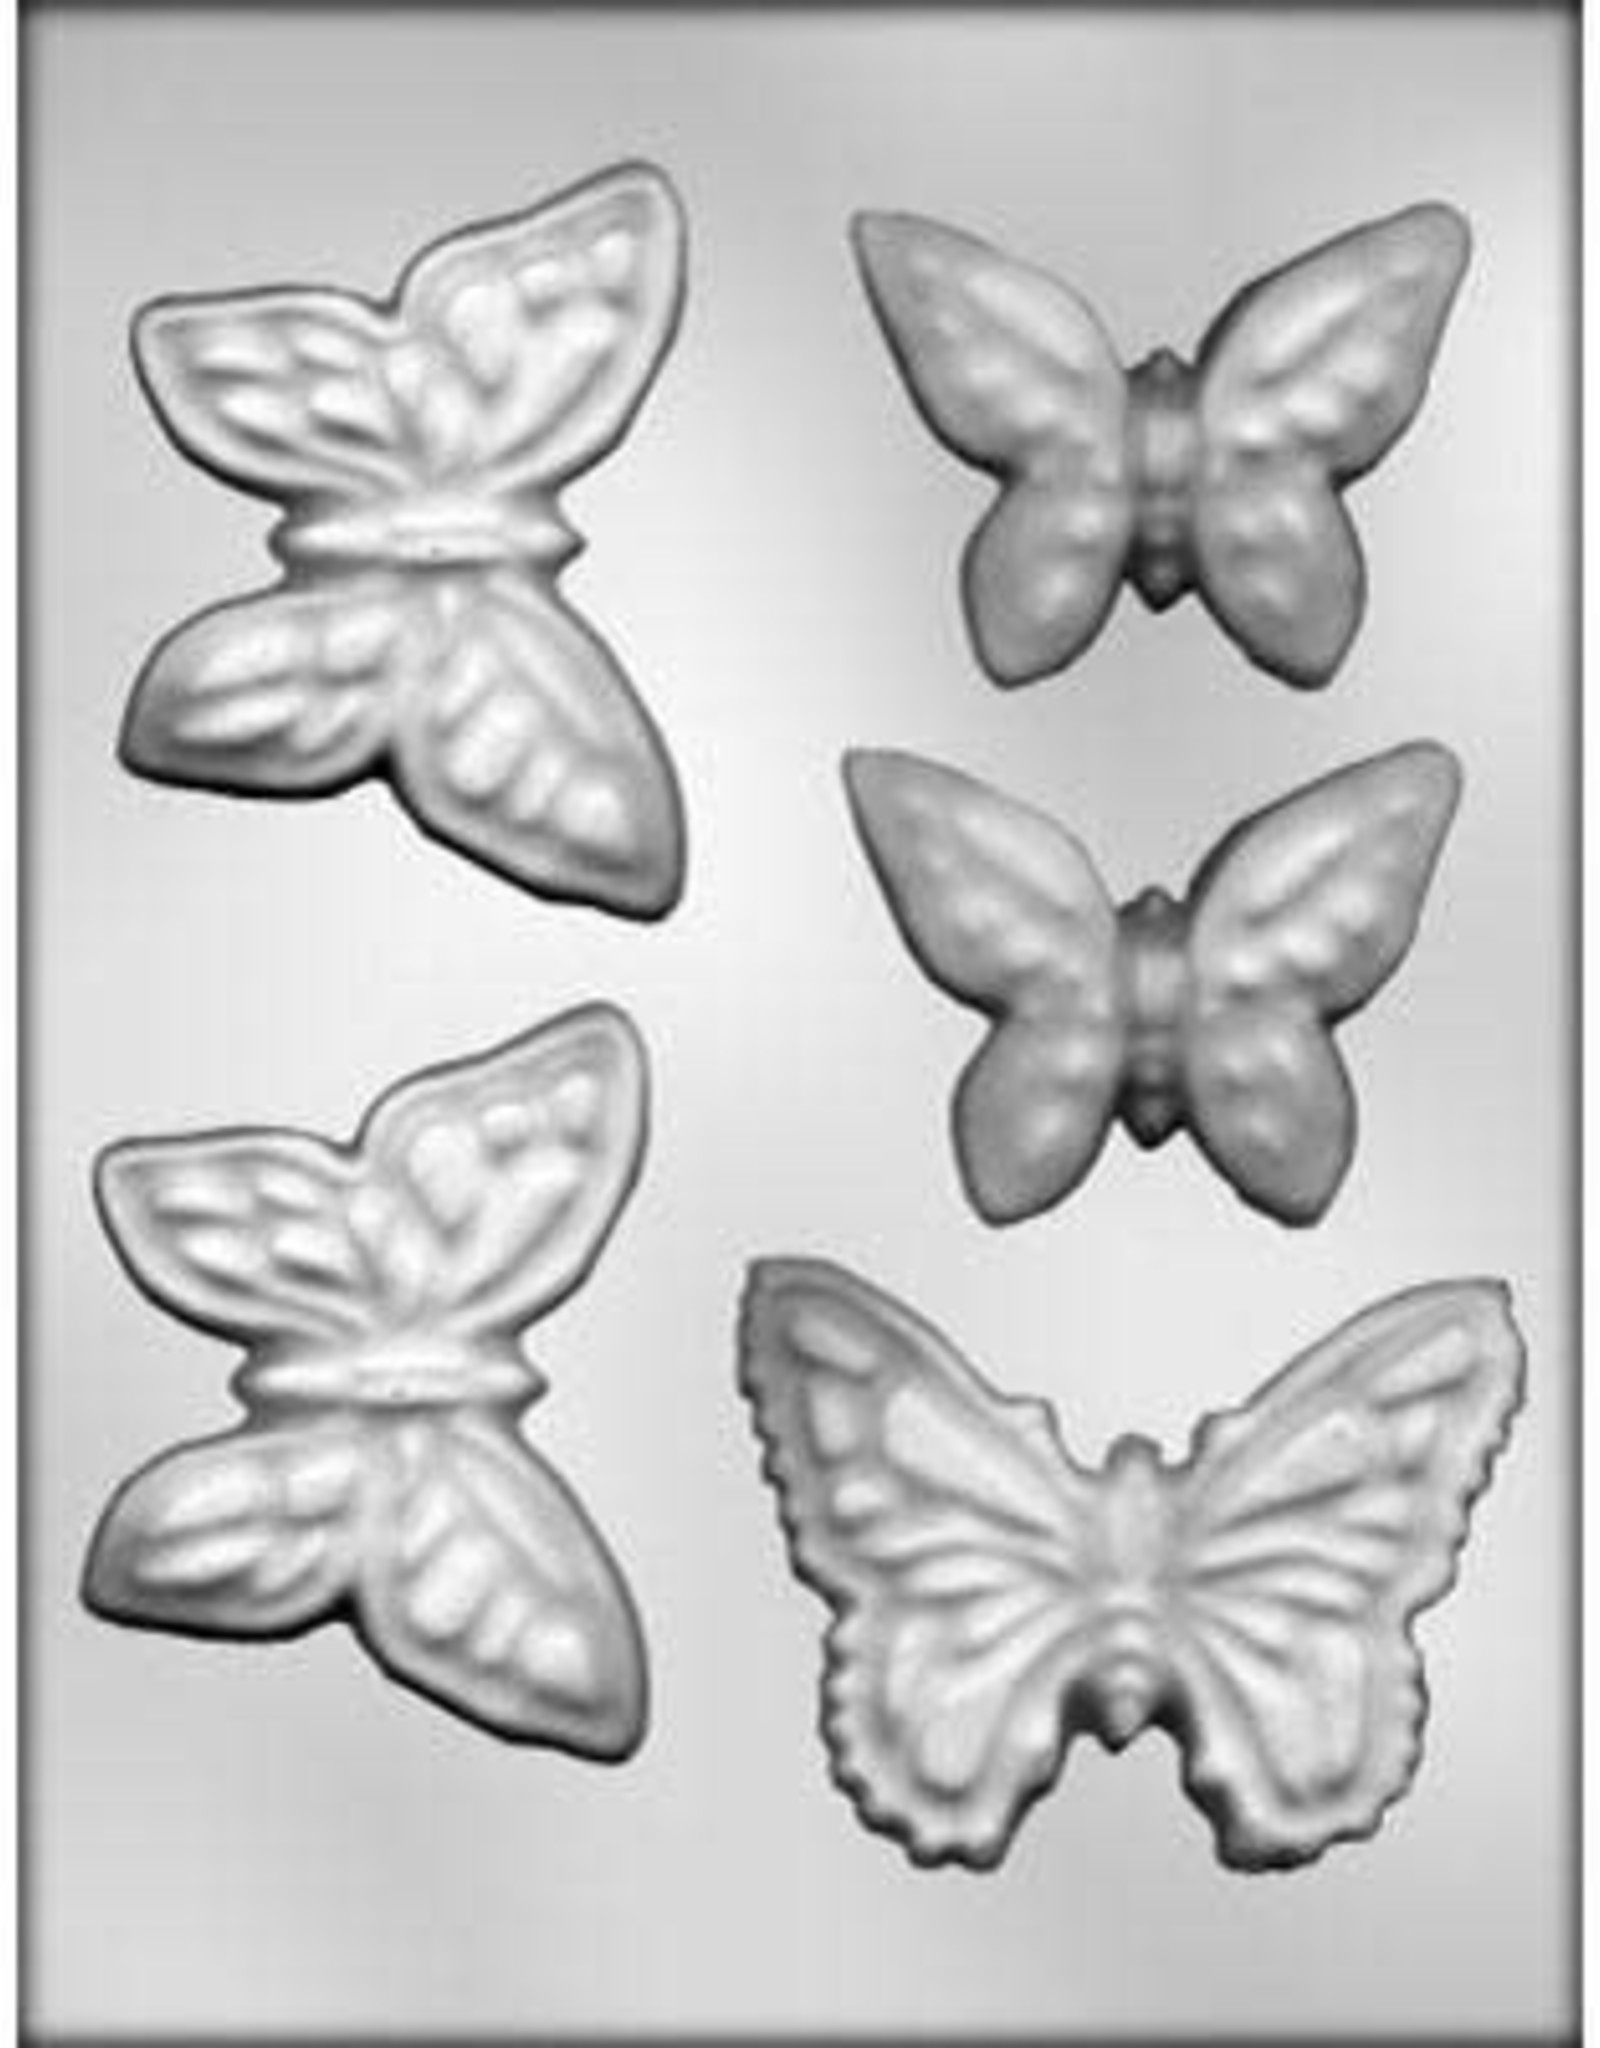 Butterfly Assortment Chocolate Mold